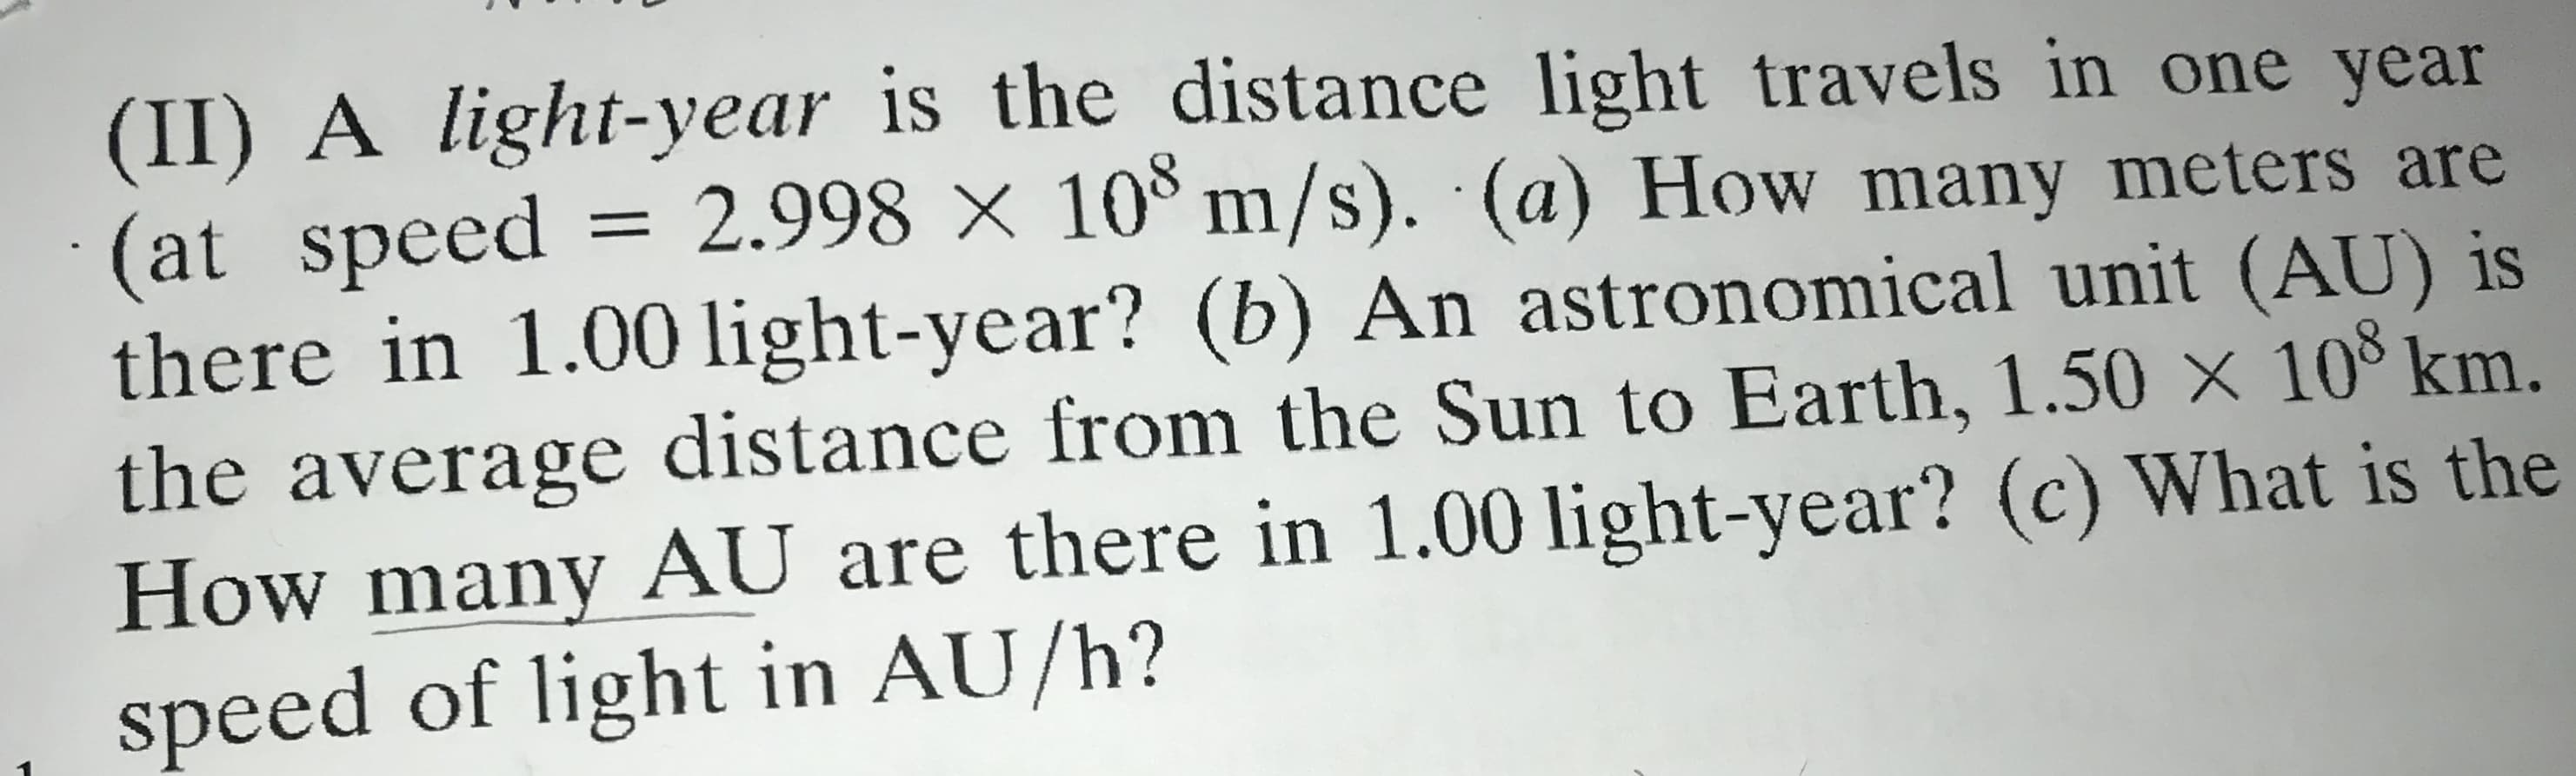 (II) A light-year is the distance light travels in one year
(at speed = 2.998 × 10° m/s). (a) How many meters are
there in 1.00 light-year? (b) An astronomical unit (AU) is
the average distance from the Sun to Earth, 1.50 x 10 km.
How many AU are there in 1.00 light-year? (c) What is the
speed of light in AU/h?
